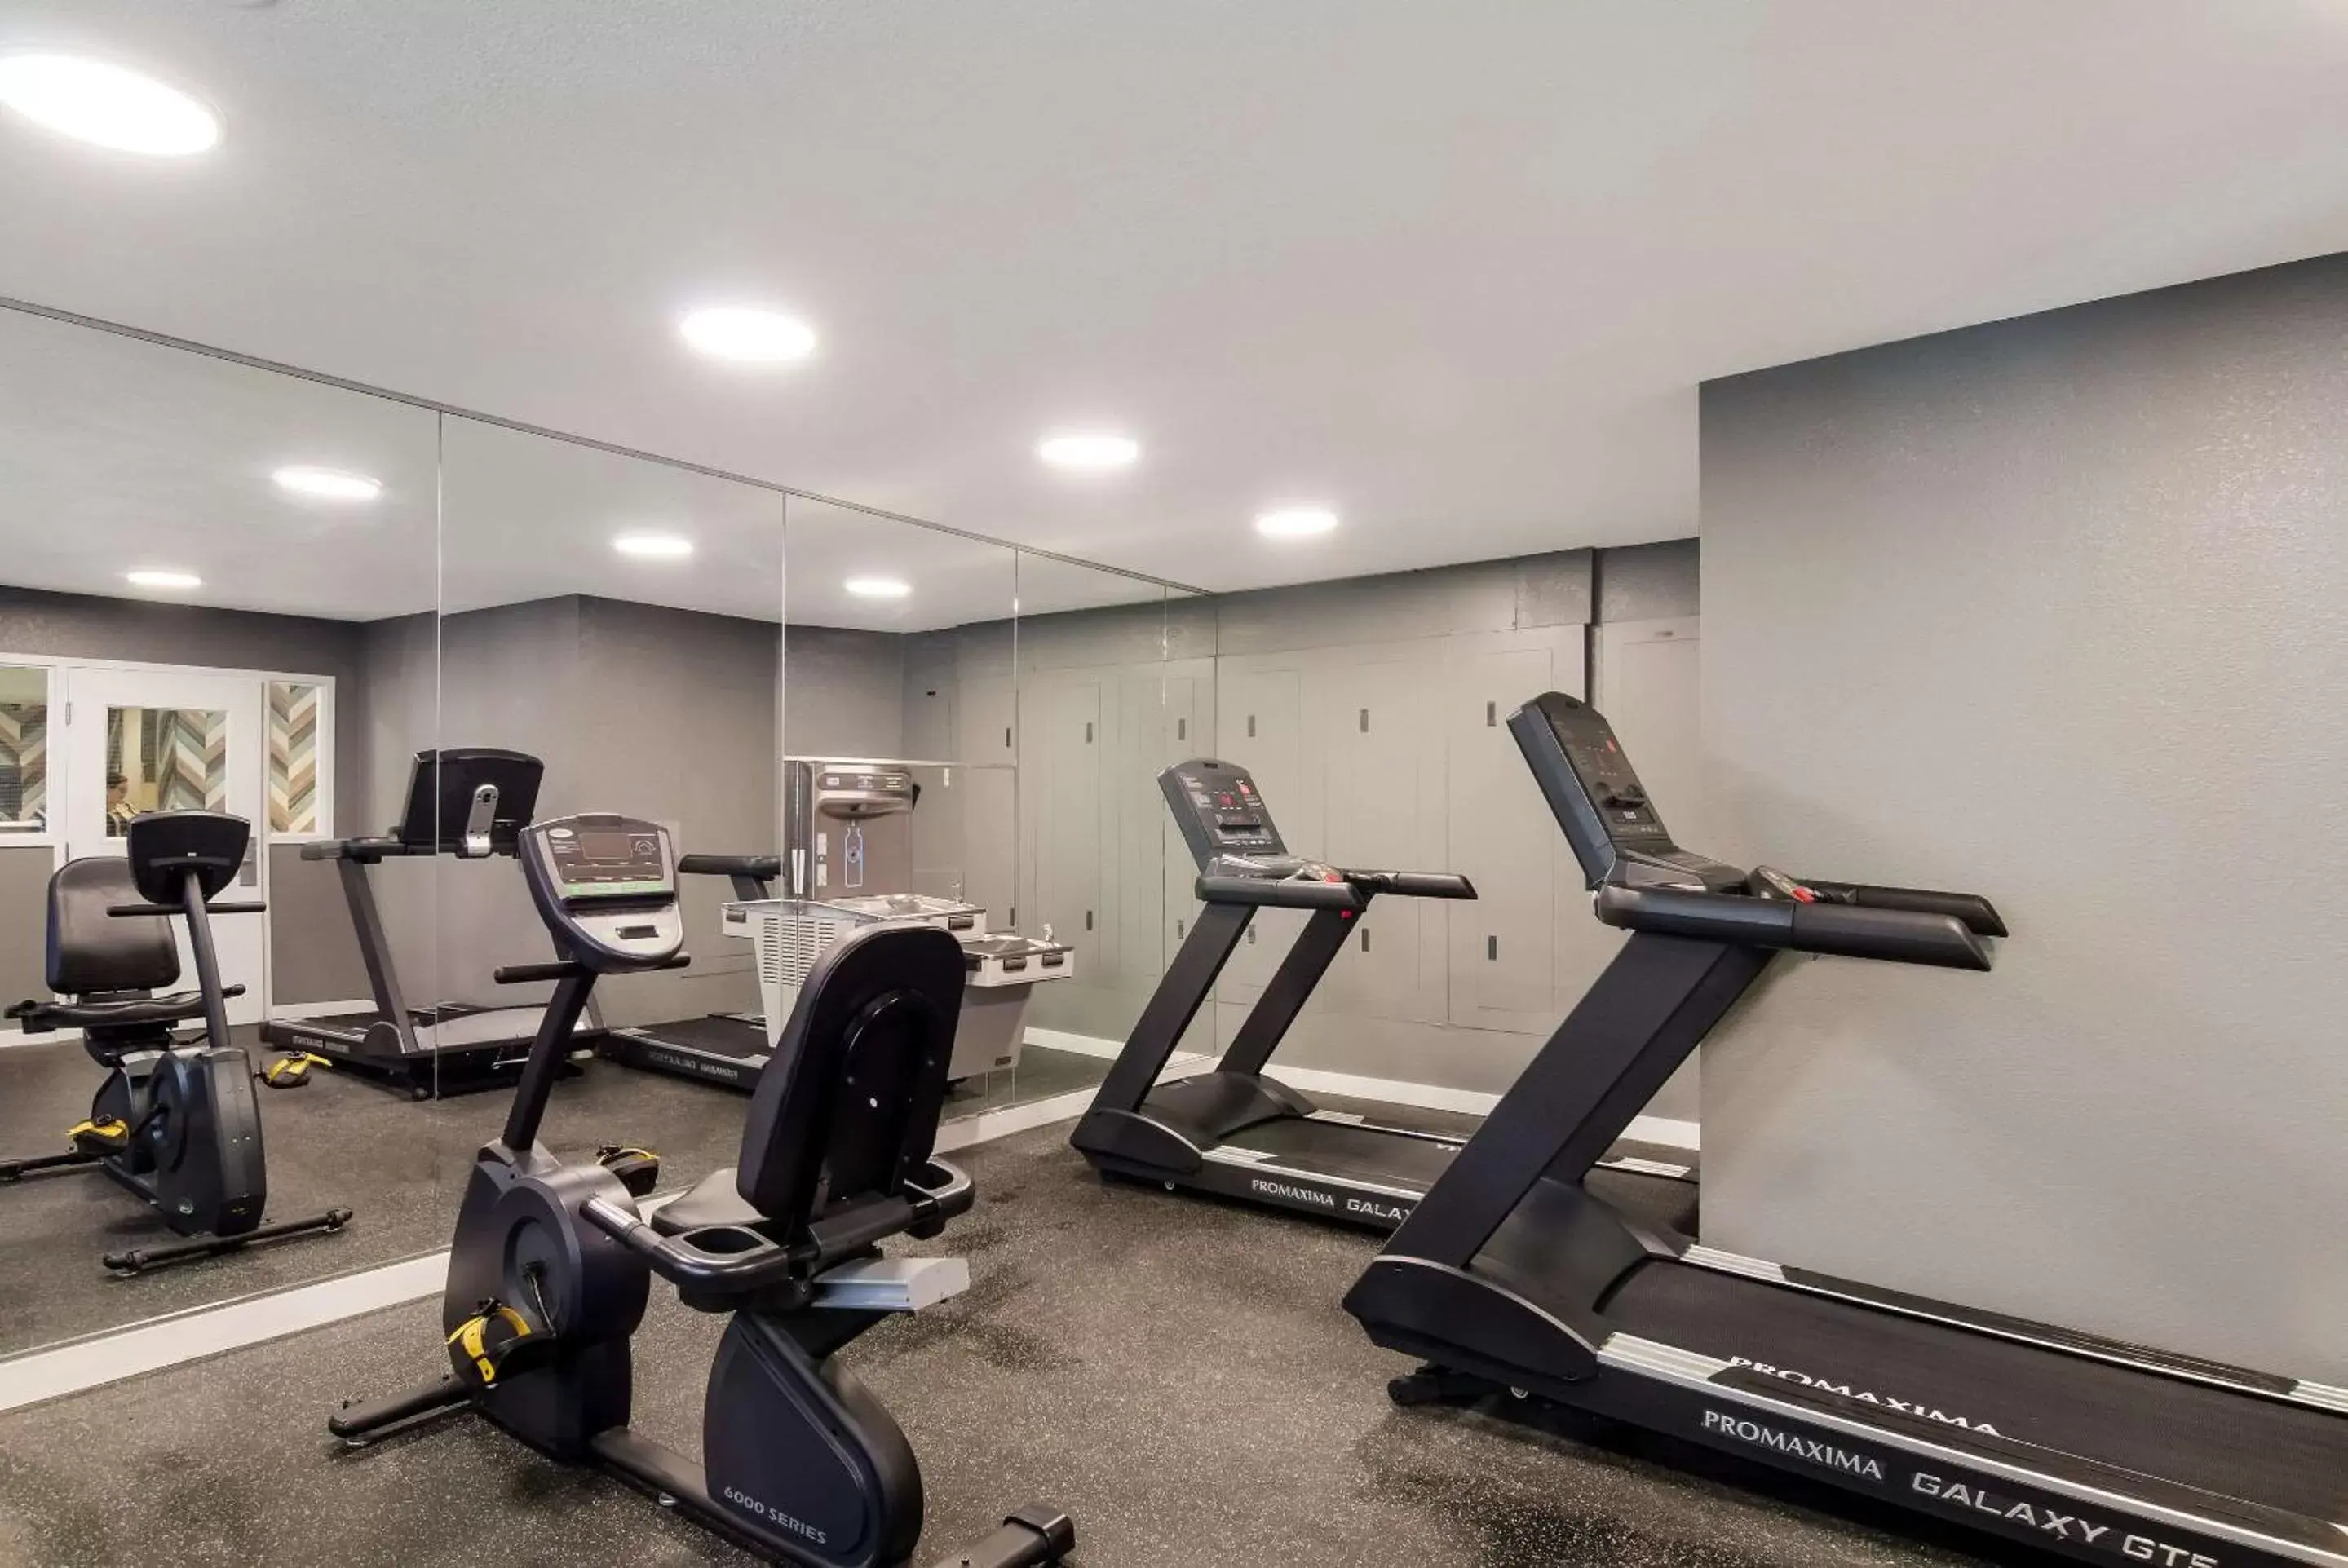 Fitness centre/facilities, Fitness Center/Facilities in MainStay Suites Denver Tech Center